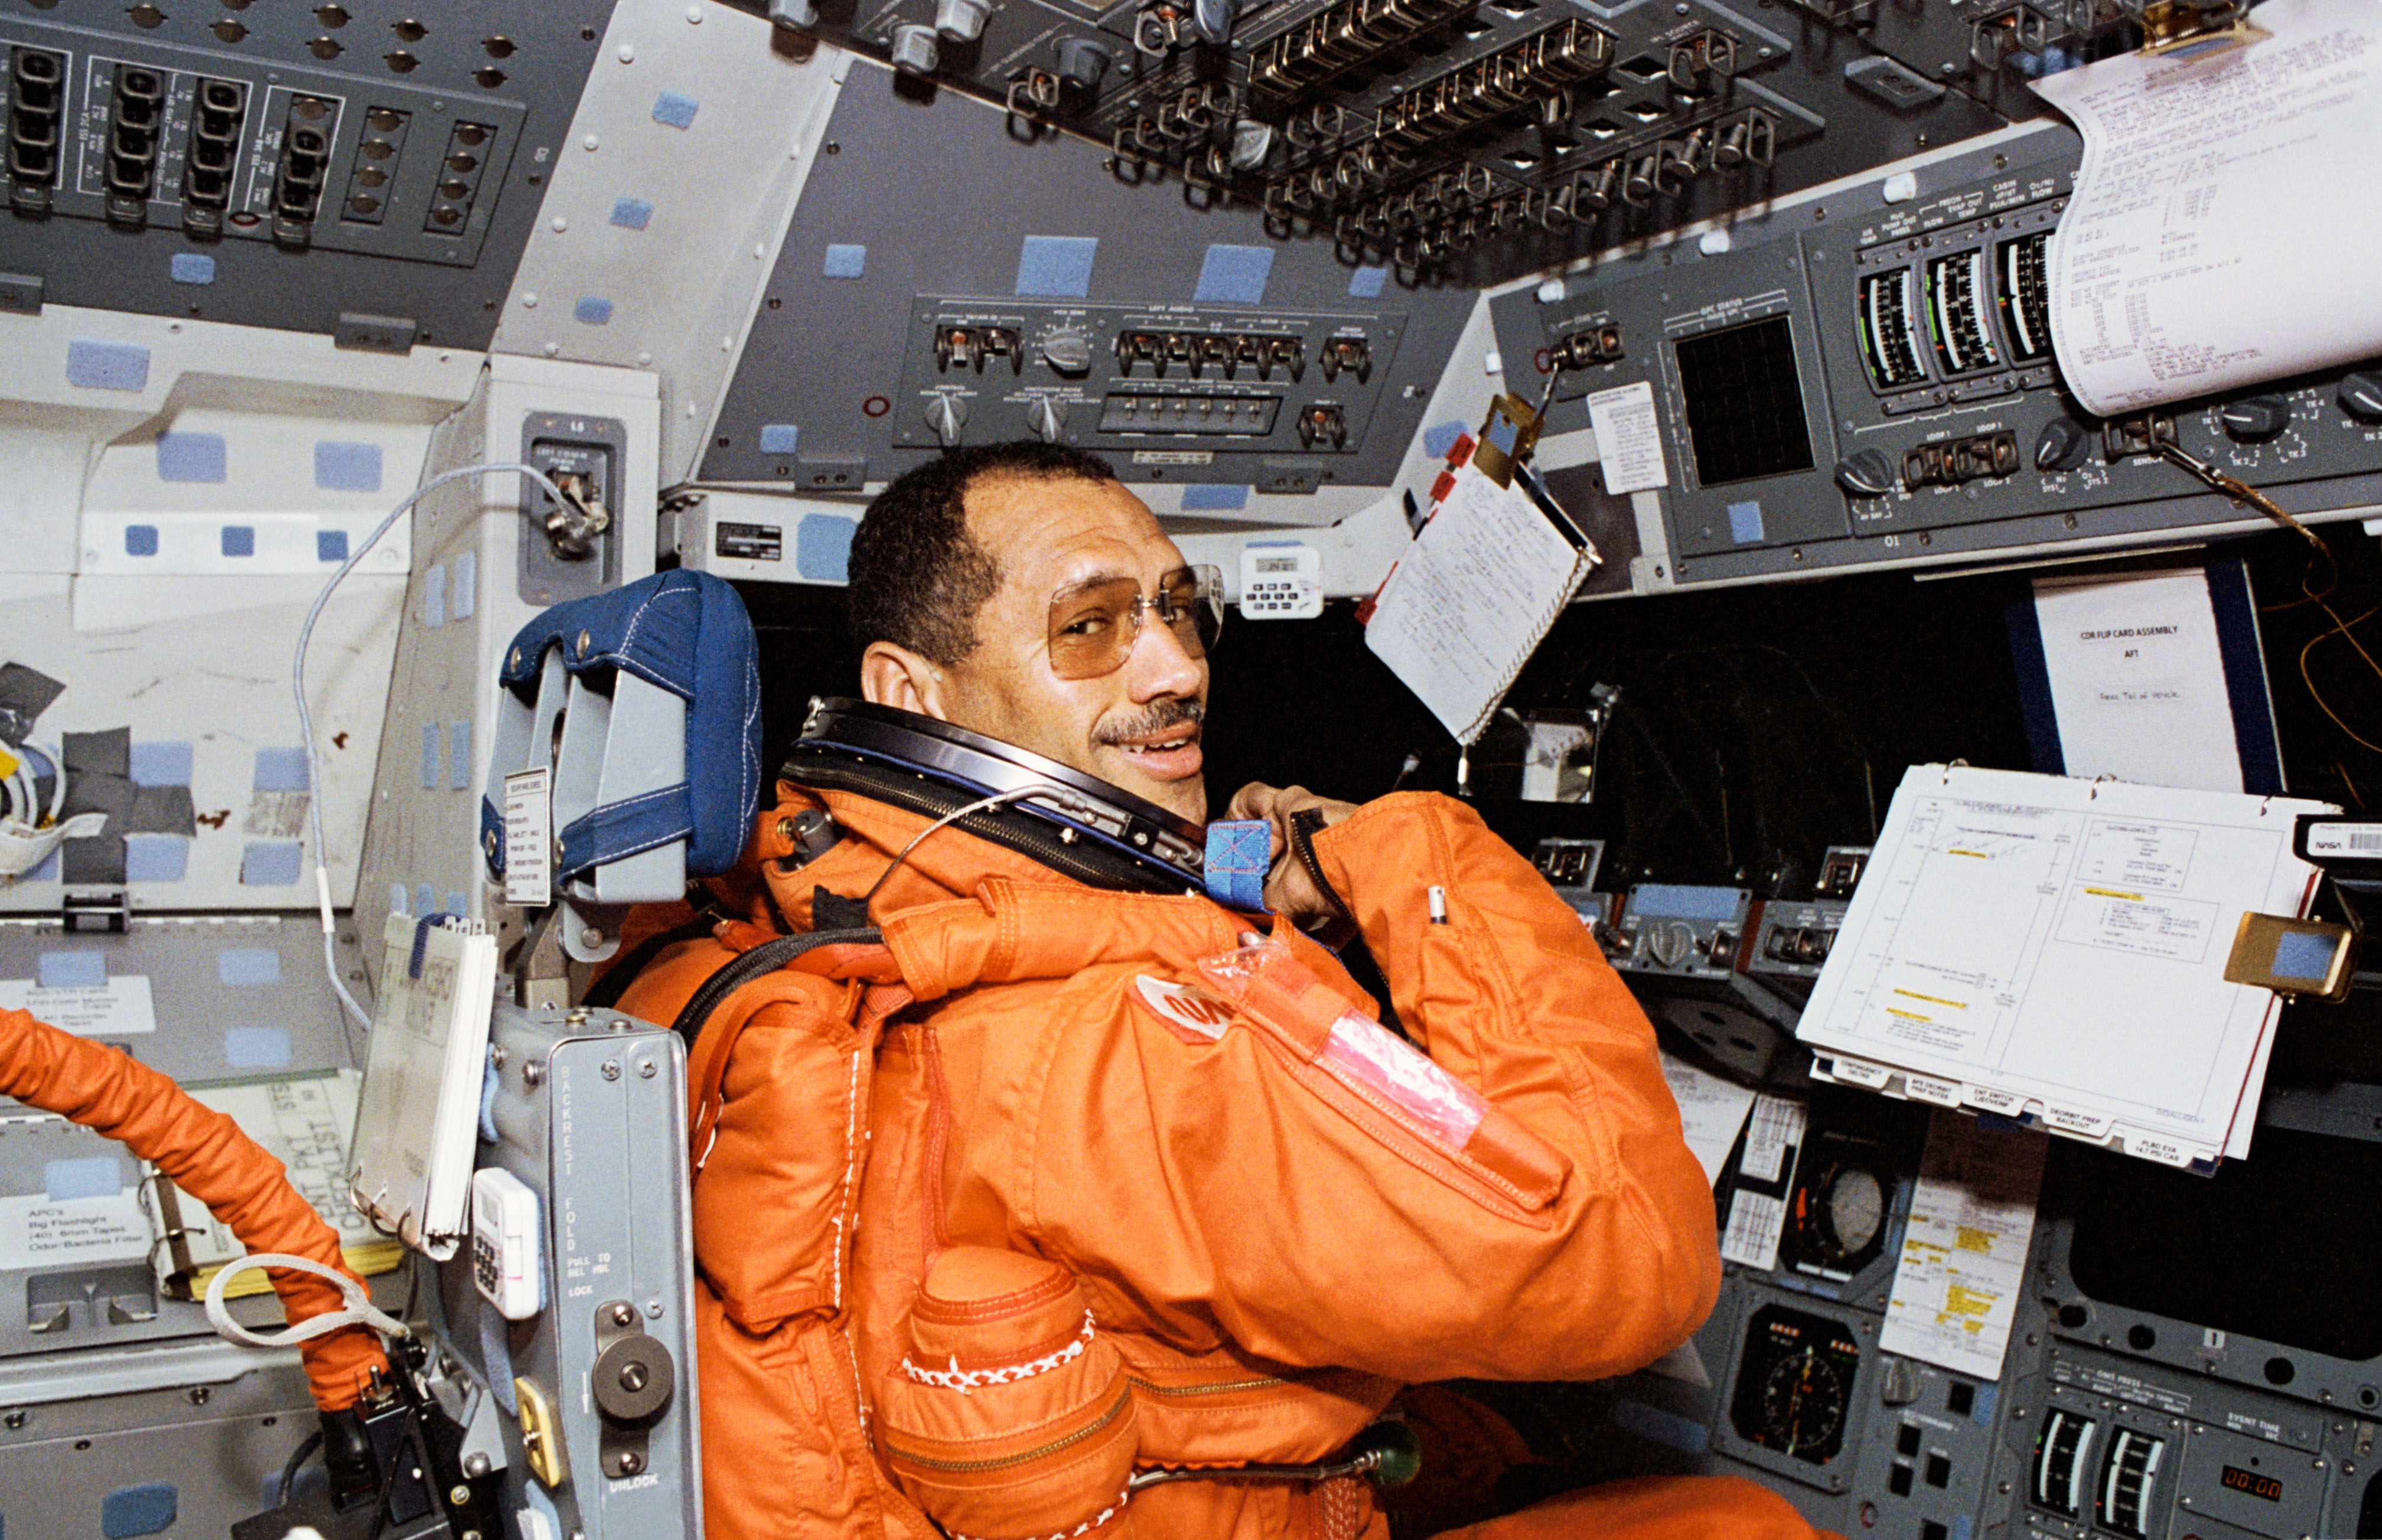 Astronaut Charles F. Bolden, a Black man, looks over his right shoulder and smiles at the camera. He is wearing an orange launch and entry suit and square tinted glasses without temples. He is sitting at the commander's station, which has many switches and dials, along with a notebook, a 3-ring binder, and various sheets of paper.